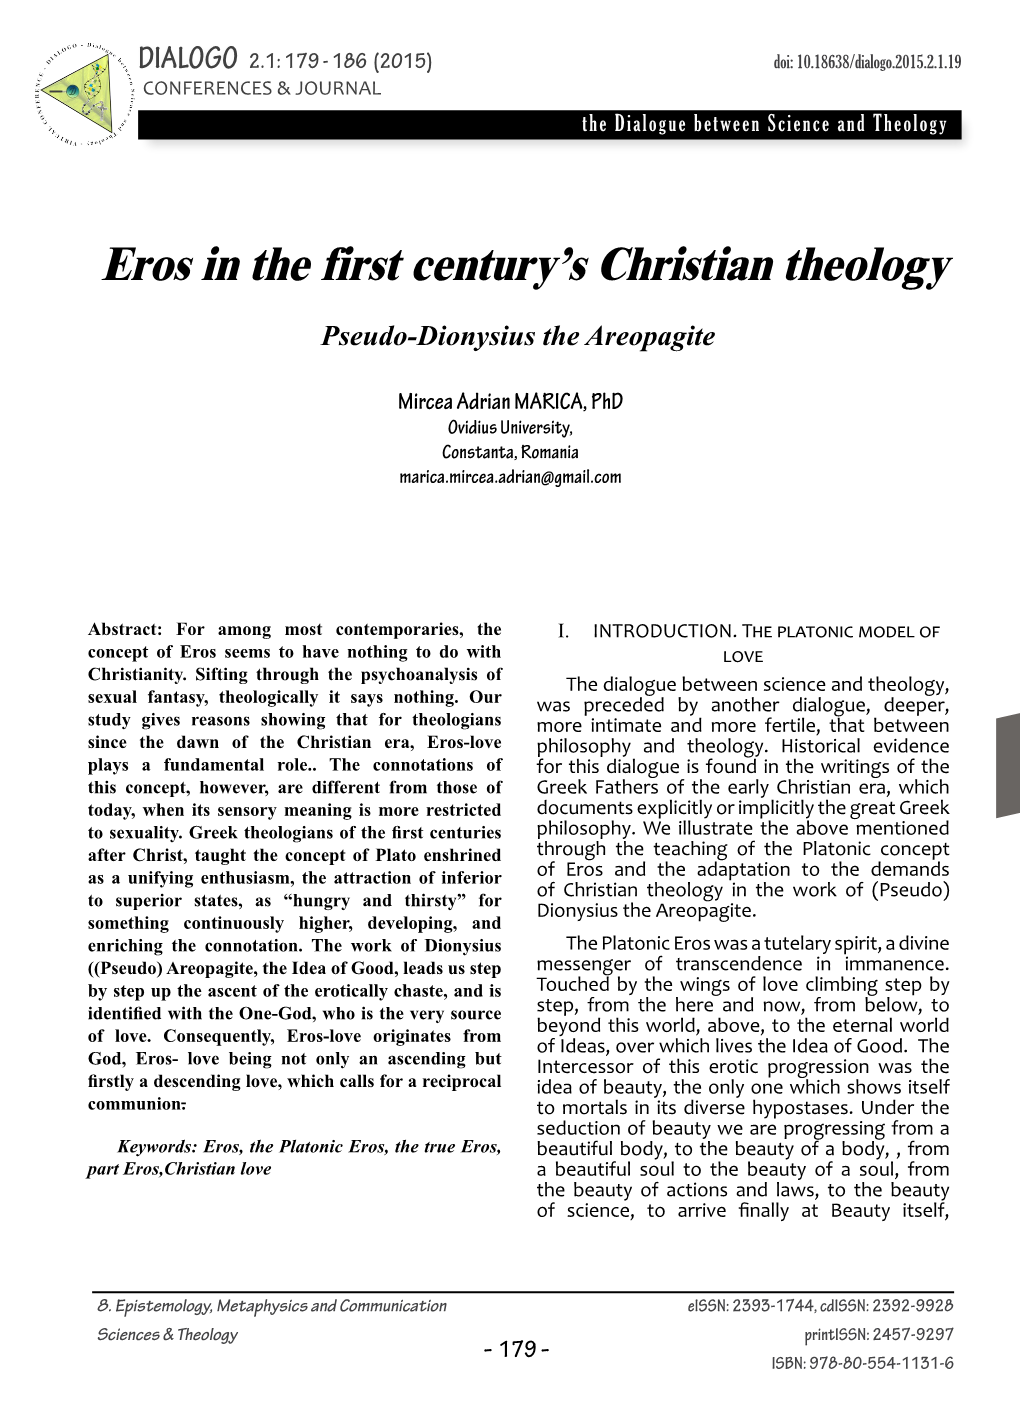 Eros in the First Century's Christian Theology